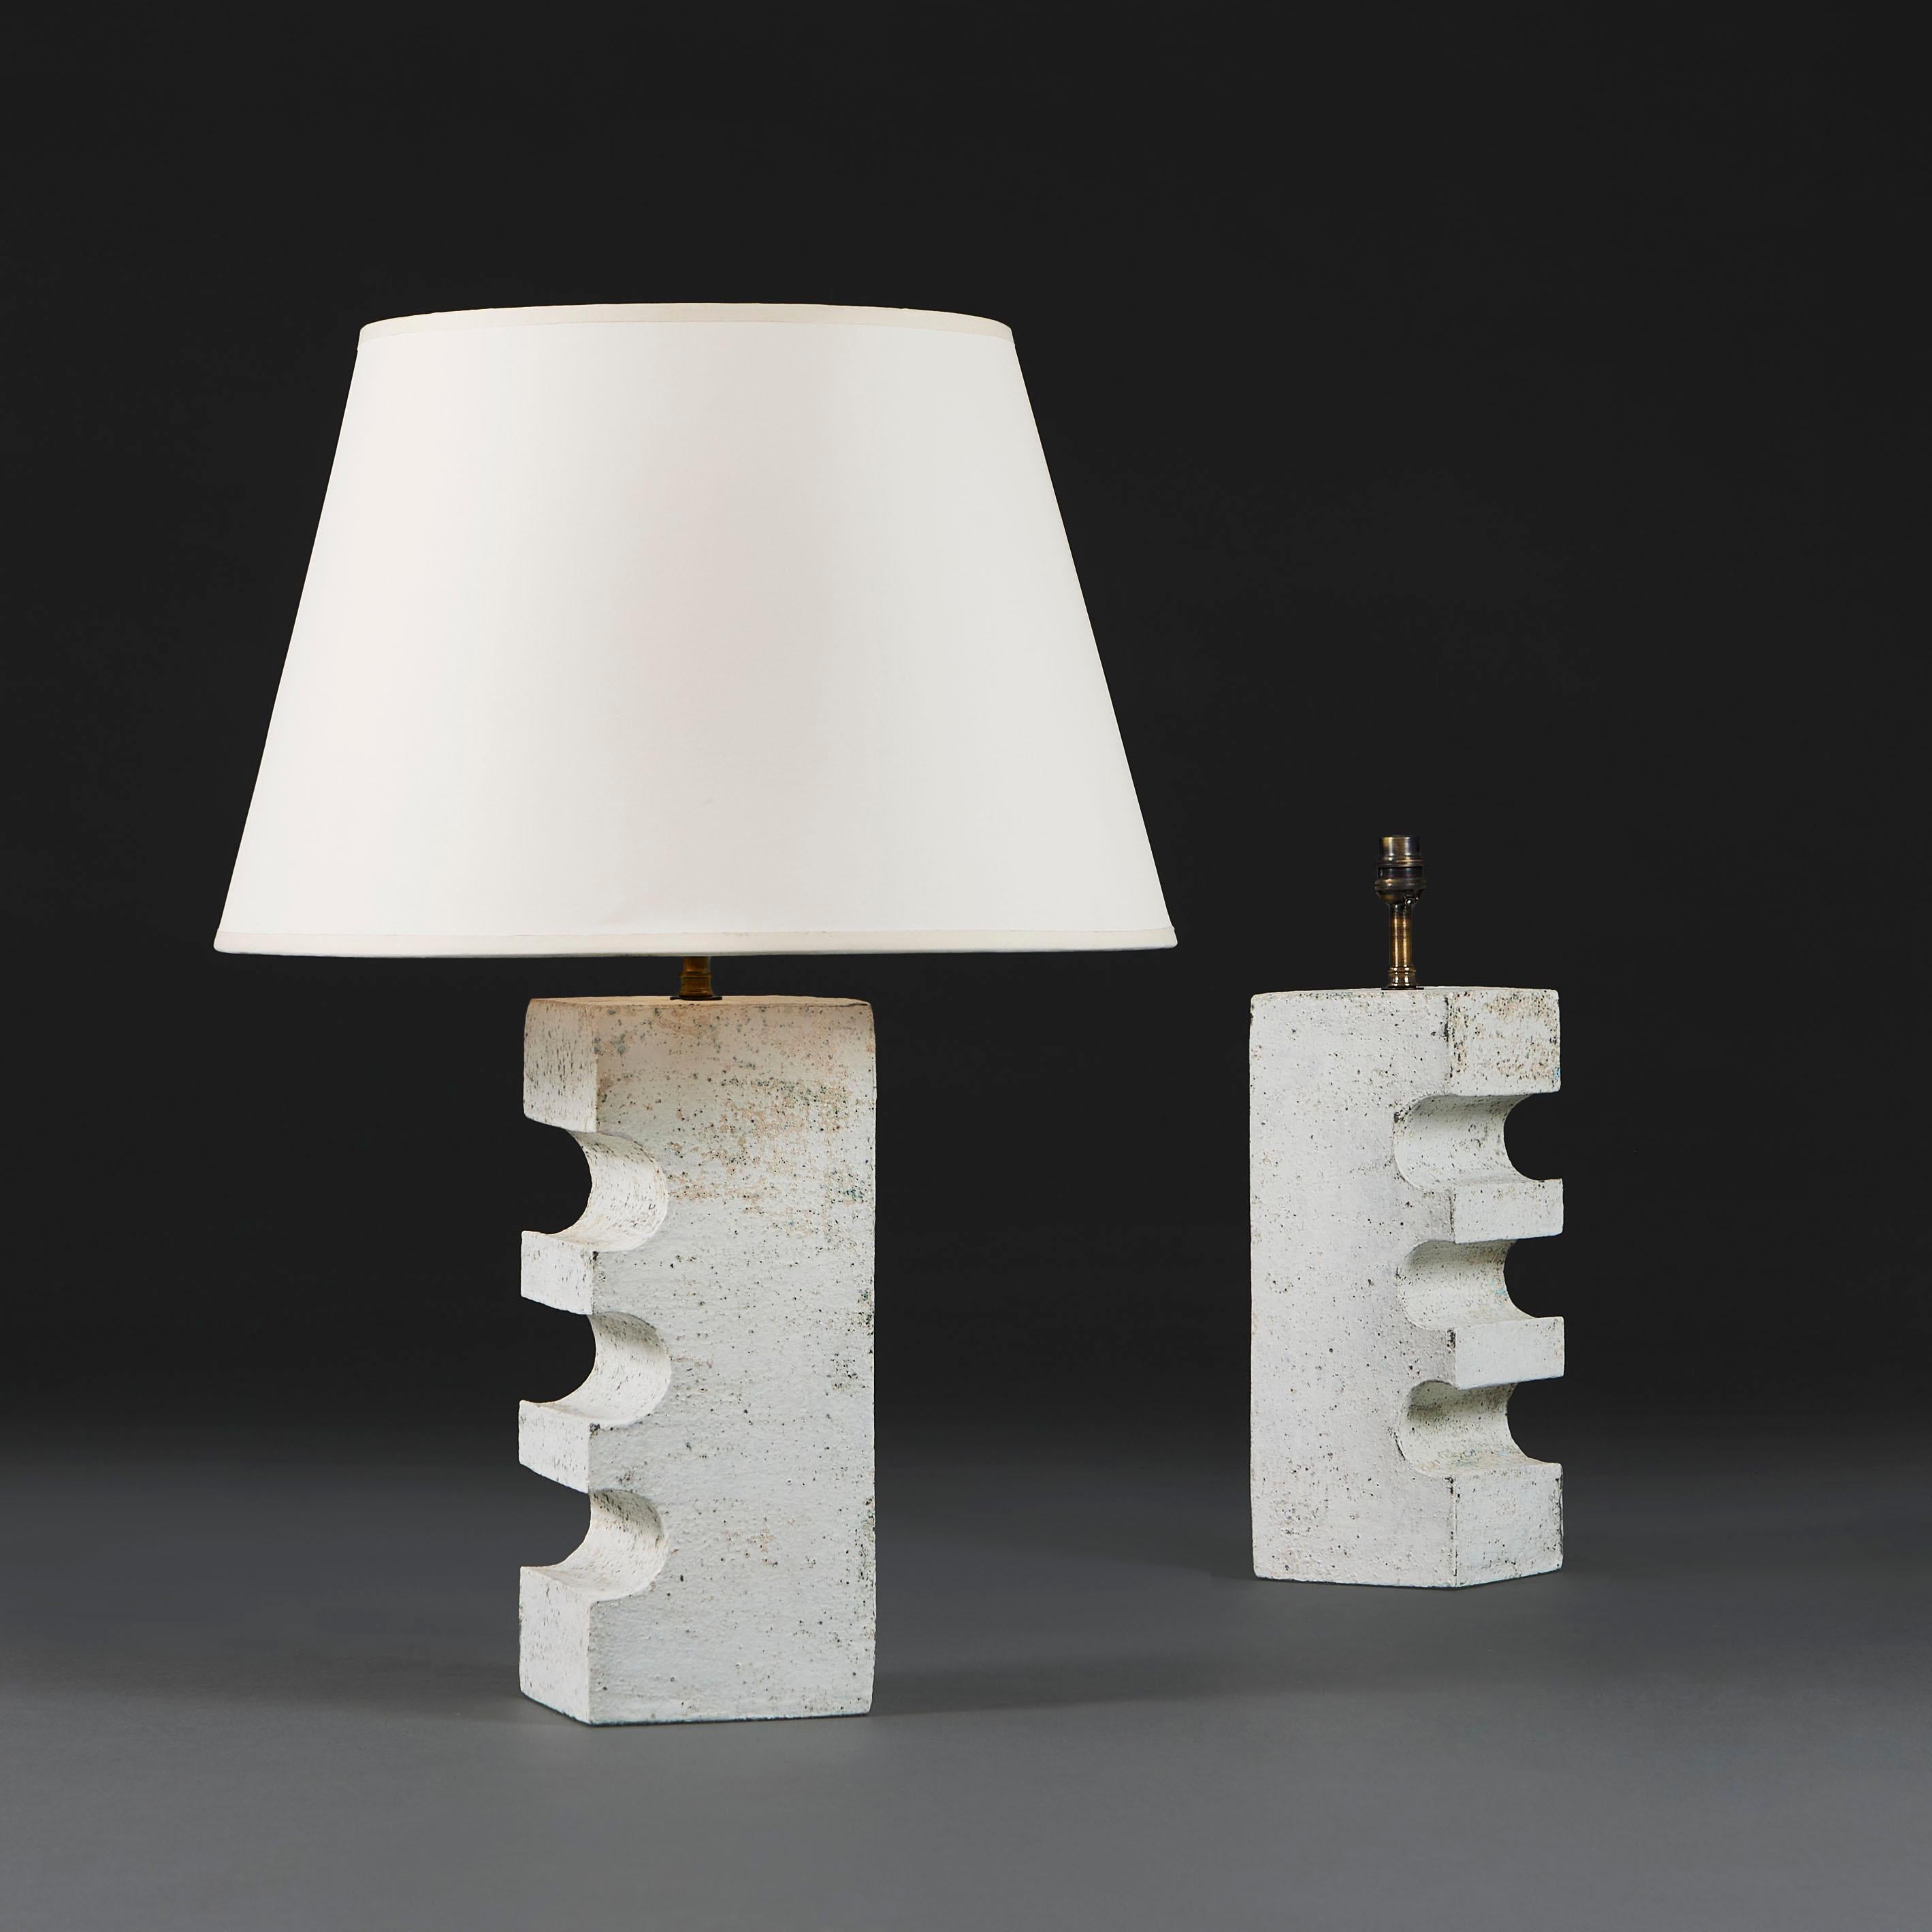 England, modern.

A pair of studio pottery stoneware lamps of cuboid form, with unusual jigsaw cutaway to one side, with patinated white glaze to the surface.

Lead time: 5-7 weeks. Please enquire for stock availability.

Photographed with an 18”